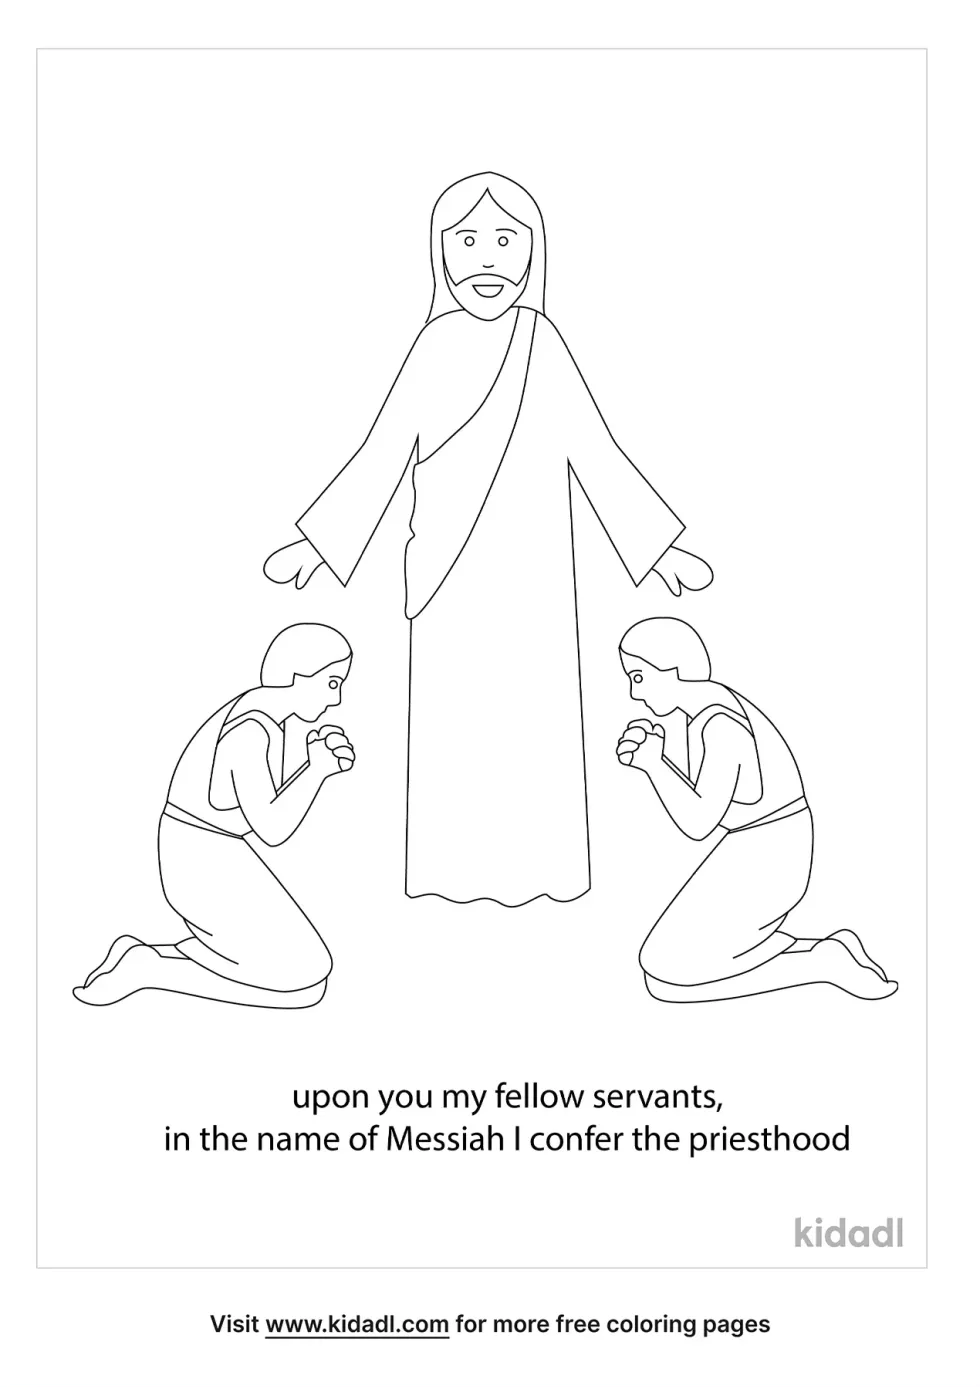 The Restoration Of The Priesthood Coloring Page